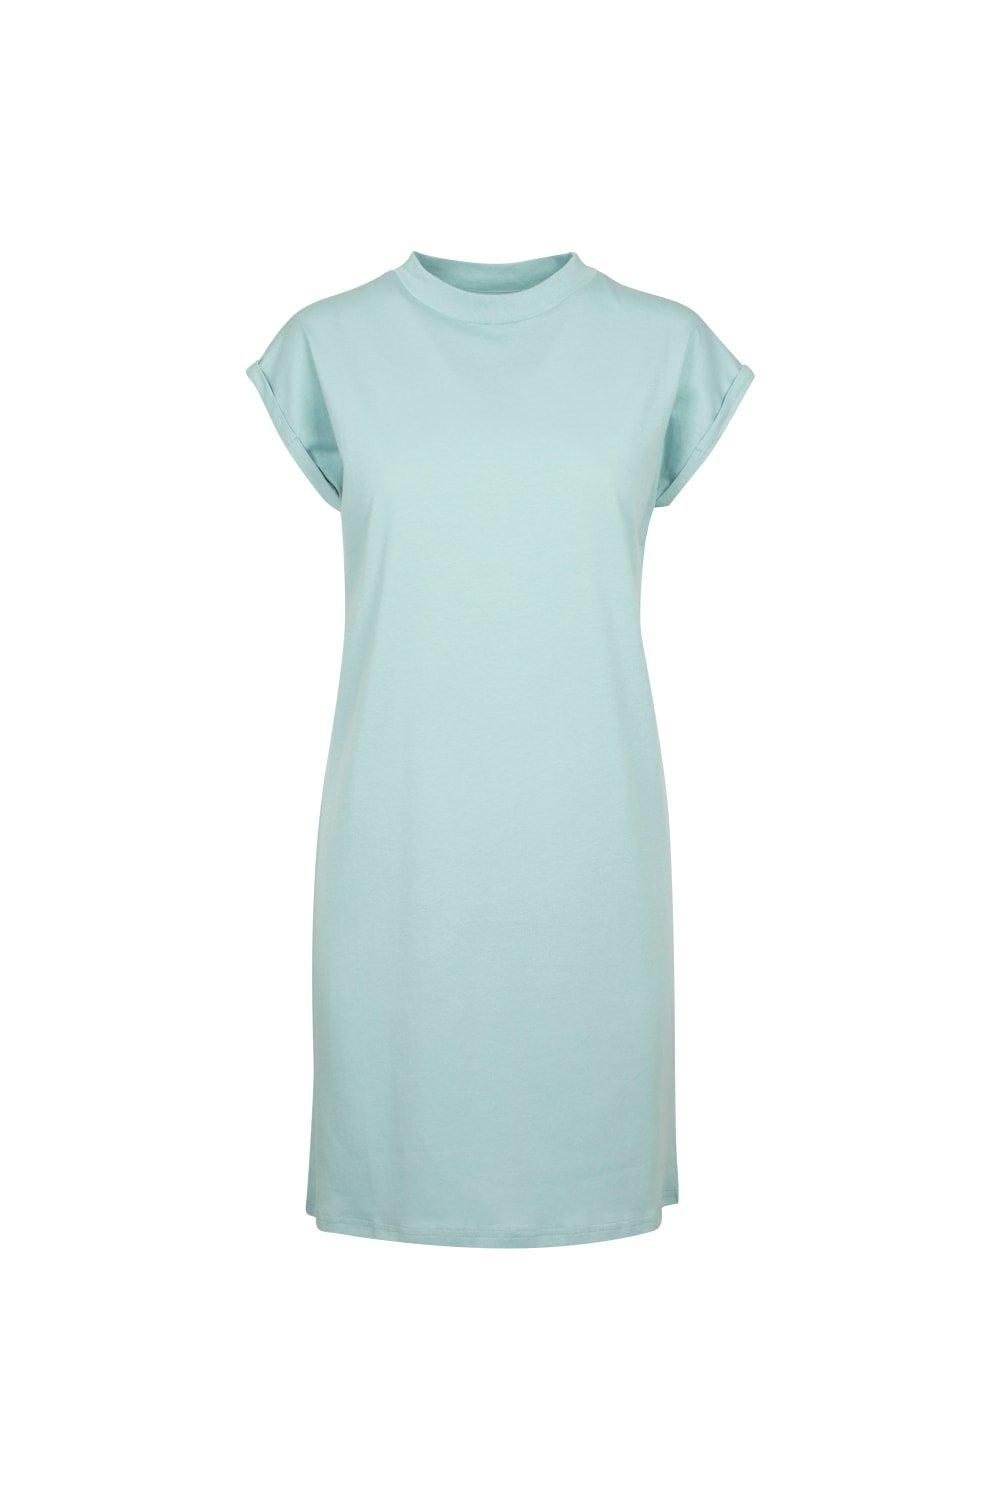 Build Your Brand Women's Casual Dress|Size: S|mint